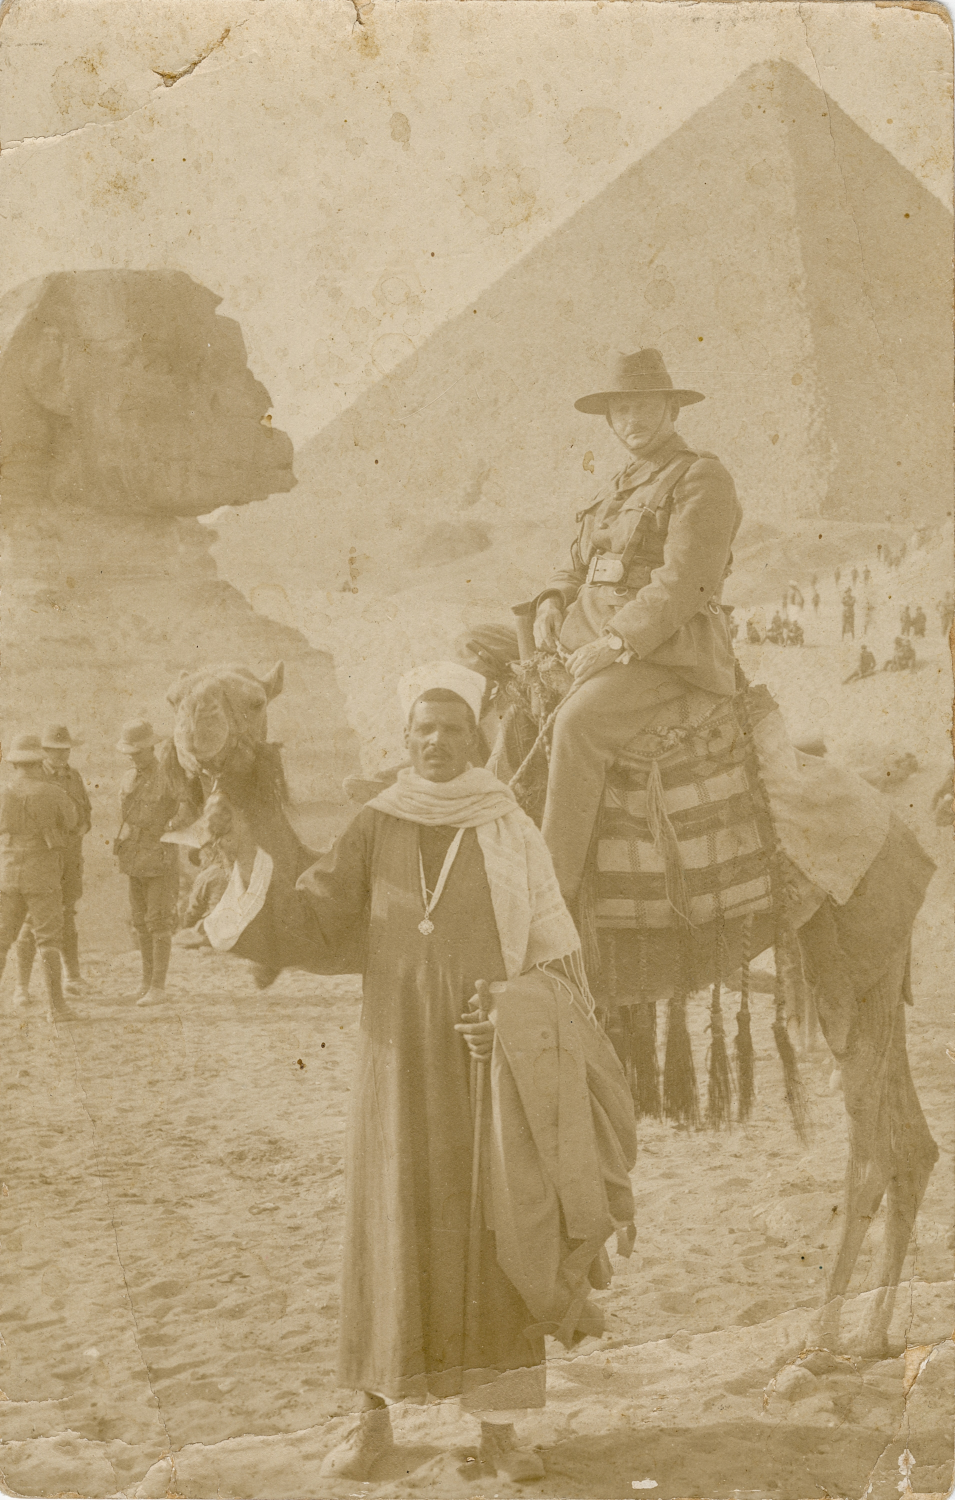 Frank on Camel in Egypt in front of Sphinx and Great Pyramid